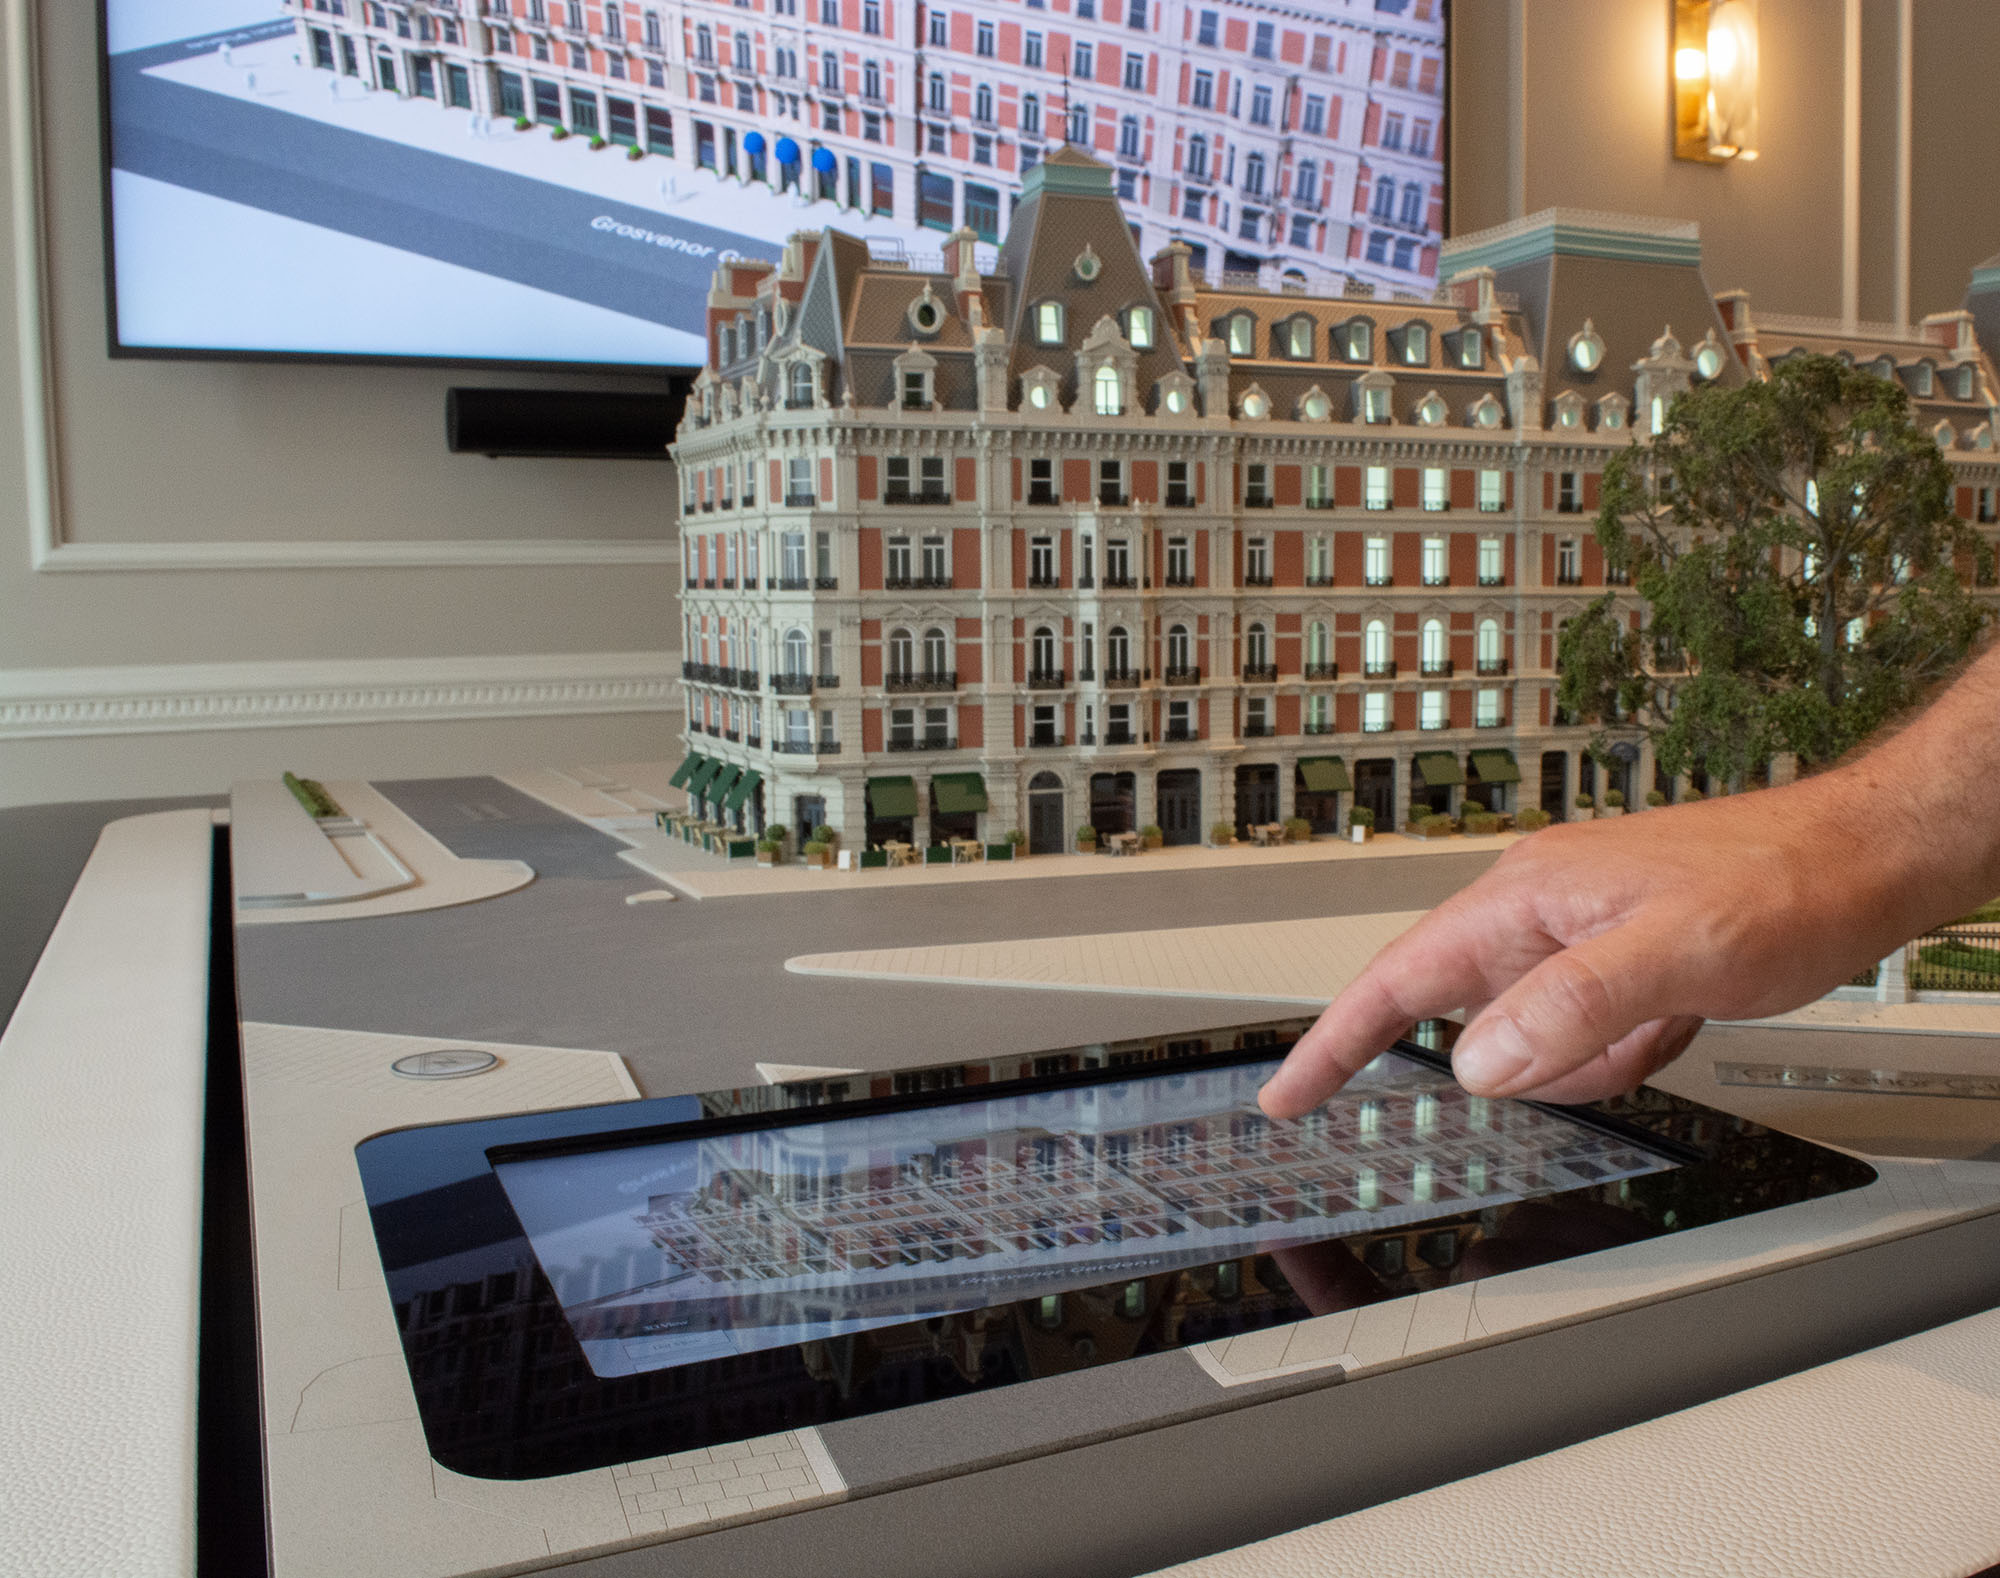 The touchscreen interactive controls scale model lighting at the 8 Eaton Lane marketing suite